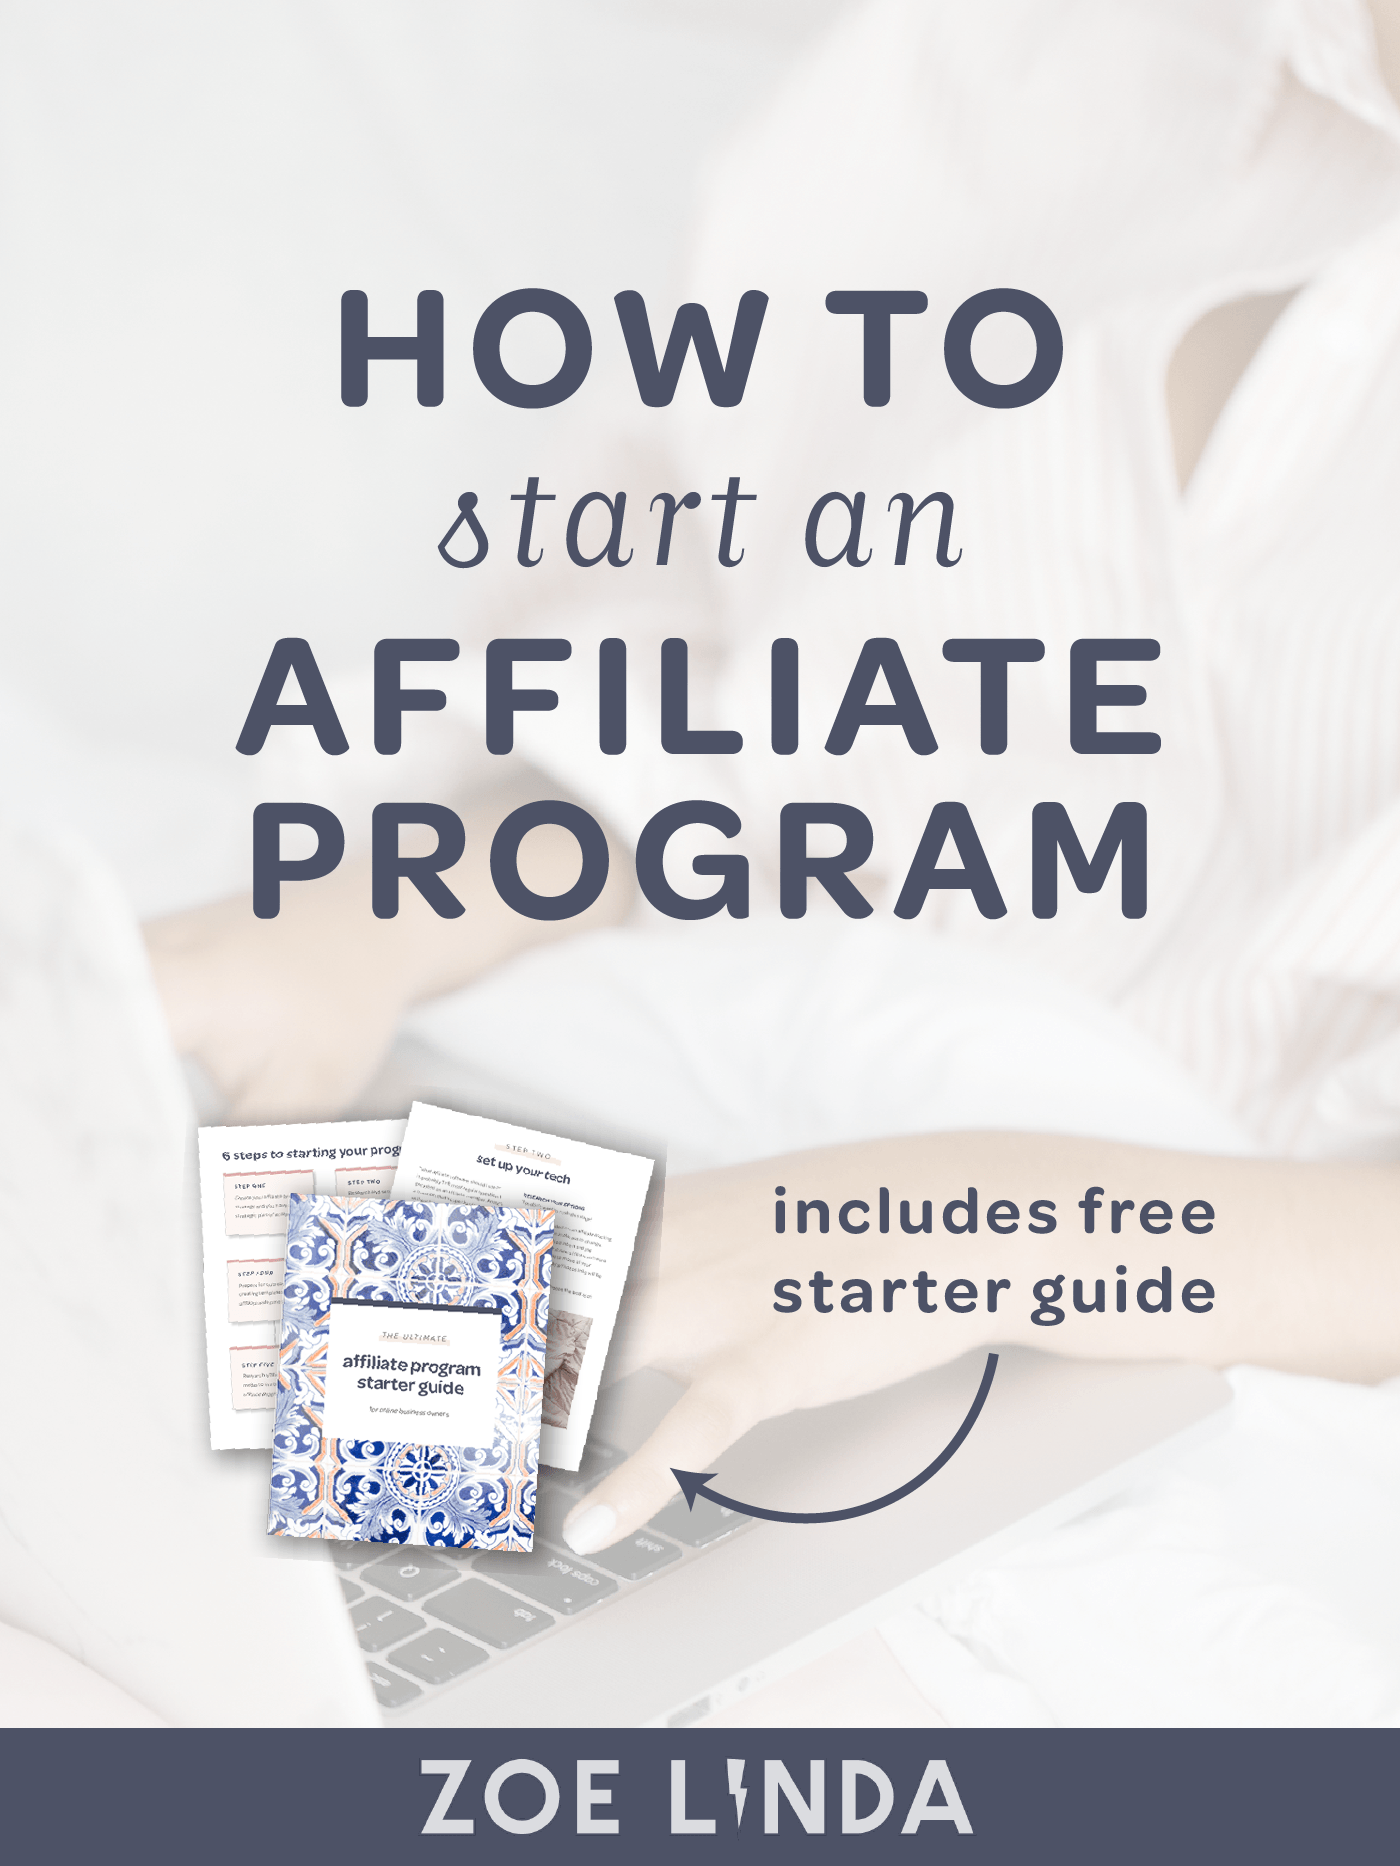 Best Nutrition Affiliate Programs 2019 – Is It Still Worth It And How Much Can You Make With It?